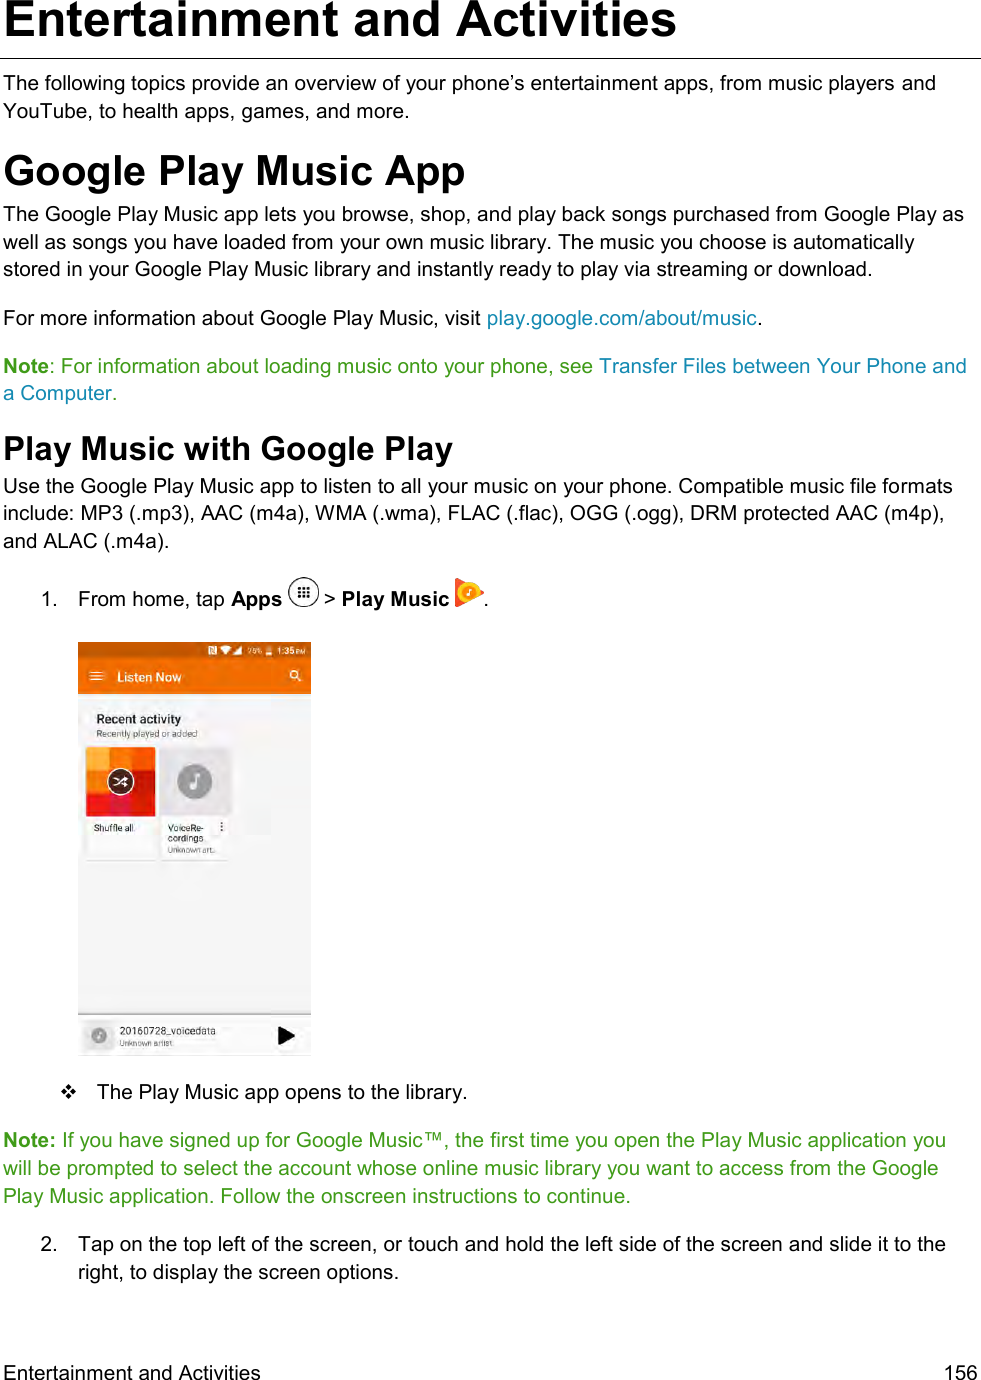  Entertainment and Activities  156 Entertainment and Activities  The following topics provide an overview of your phone’s entertainment apps, from music players and YouTube, to health apps, games, and more. Google Play Music App The Google Play Music app lets you browse, shop, and play back songs purchased from Google Play as well as songs you have loaded from your own music library. The music you choose is automatically stored in your Google Play Music library and instantly ready to play via streaming or download. For more information about Google Play Music, visit play.google.com/about/music. Note: For information about loading music onto your phone, see Transfer Files between Your Phone and a Computer. Play Music with Google Play Use the Google Play Music app to listen to all your music on your phone. Compatible music file formats include: MP3 (.mp3), AAC (m4a), WMA (.wma), FLAC (.flac), OGG (.ogg), DRM protected AAC (m4p), and ALAC (.m4a). 1.  From home, tap Apps   &gt; Play Music  .      The Play Music app opens to the library. Note: If you have signed up for Google Music™, the first time you open the Play Music application you will be prompted to select the account whose online music library you want to access from the Google Play Music application. Follow the onscreen instructions to continue. 2.  Tap on the top left of the screen, or touch and hold the left side of the screen and slide it to the right, to display the screen options. 